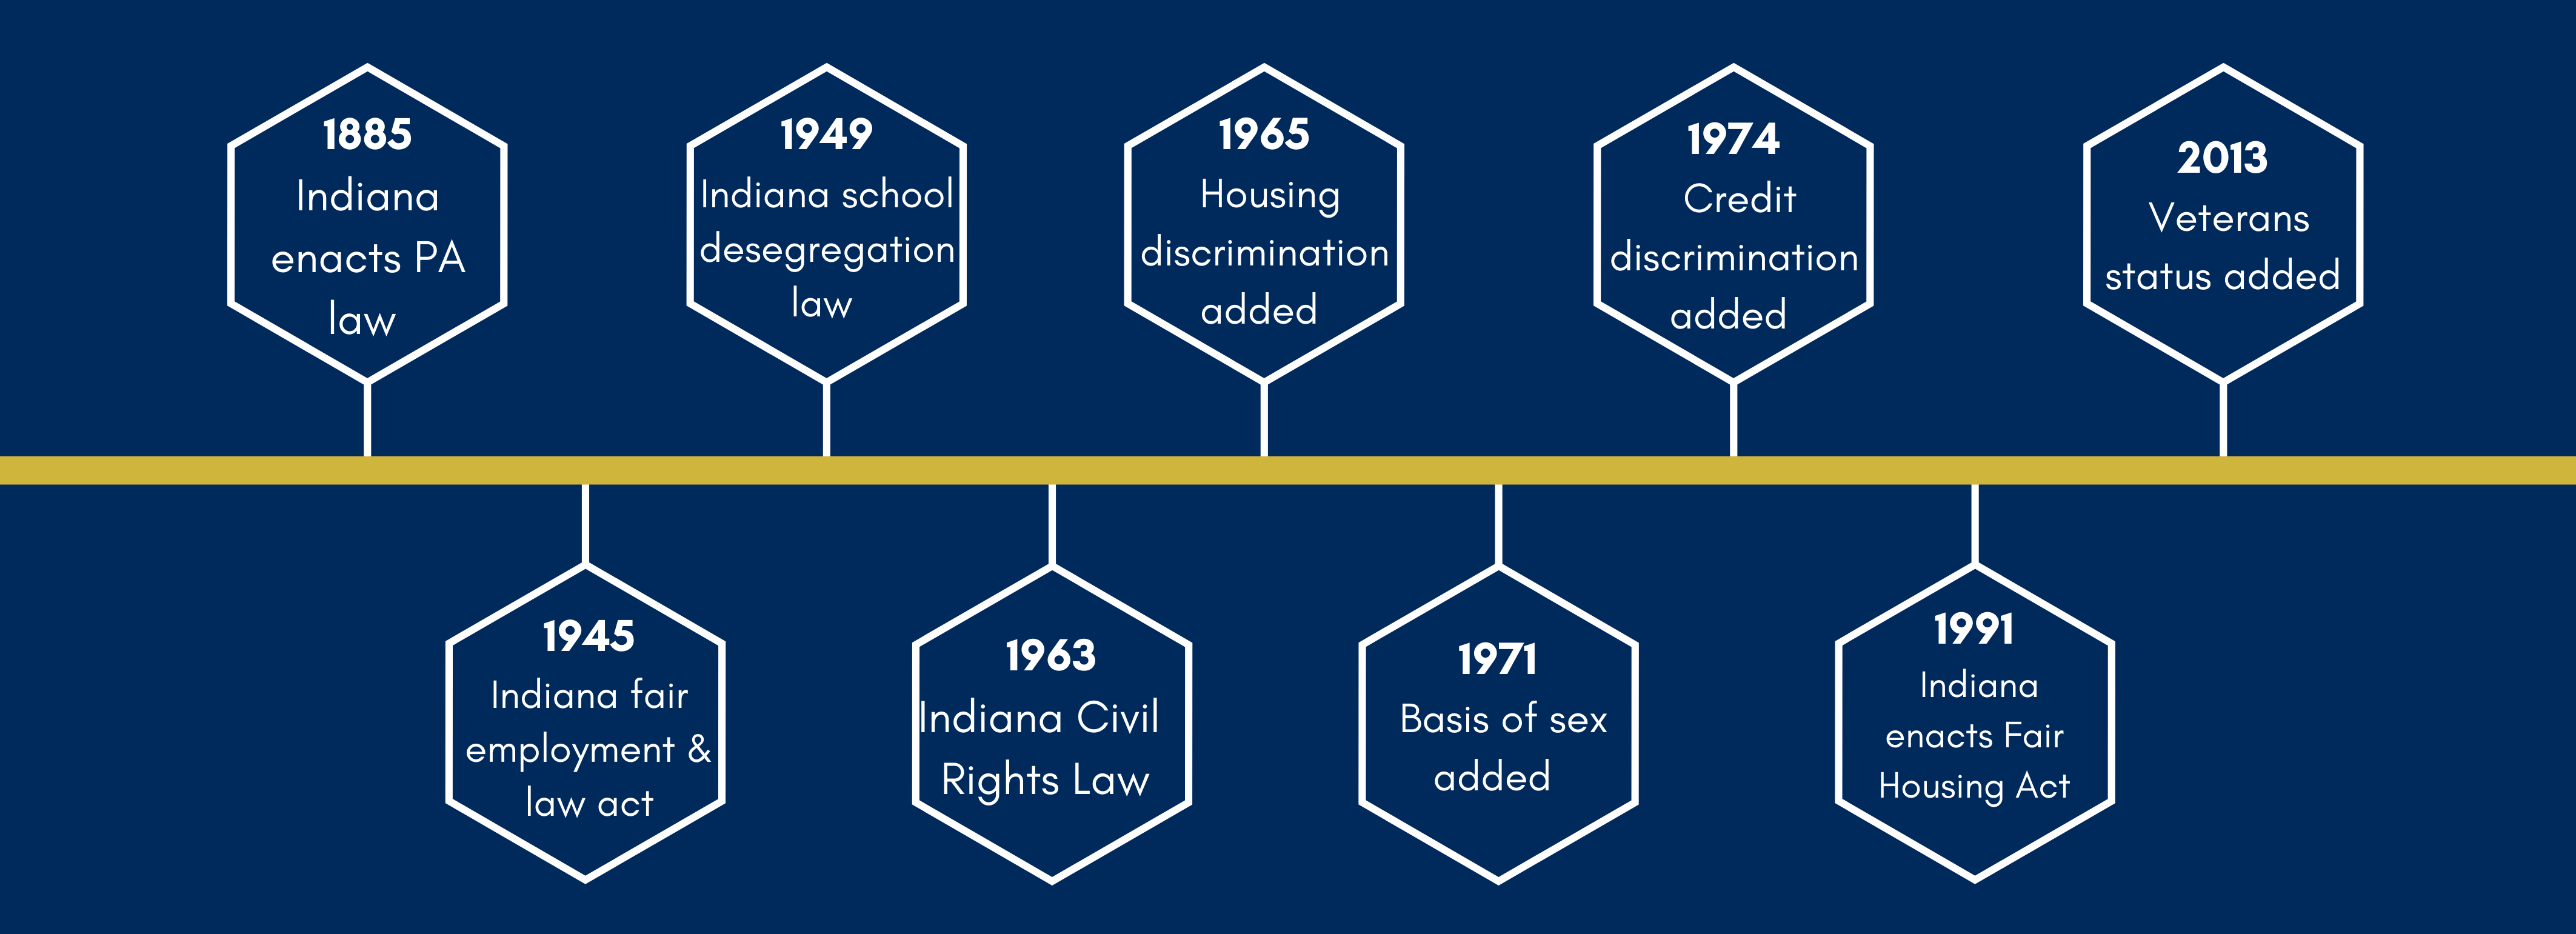 1885 - Indiana enacts PA law, 1945 - Indiana fair employment and law act, 1949 - Indiana school desegregation law, 1963 - Indiana Civil Rights Law, 1965 - Housing discrimination added, 1971 - Basis of sex added, 1974 - Credit discrimination added, 1991 - Indiana enacts Fair Housing Act, 2013 - Veterans status added